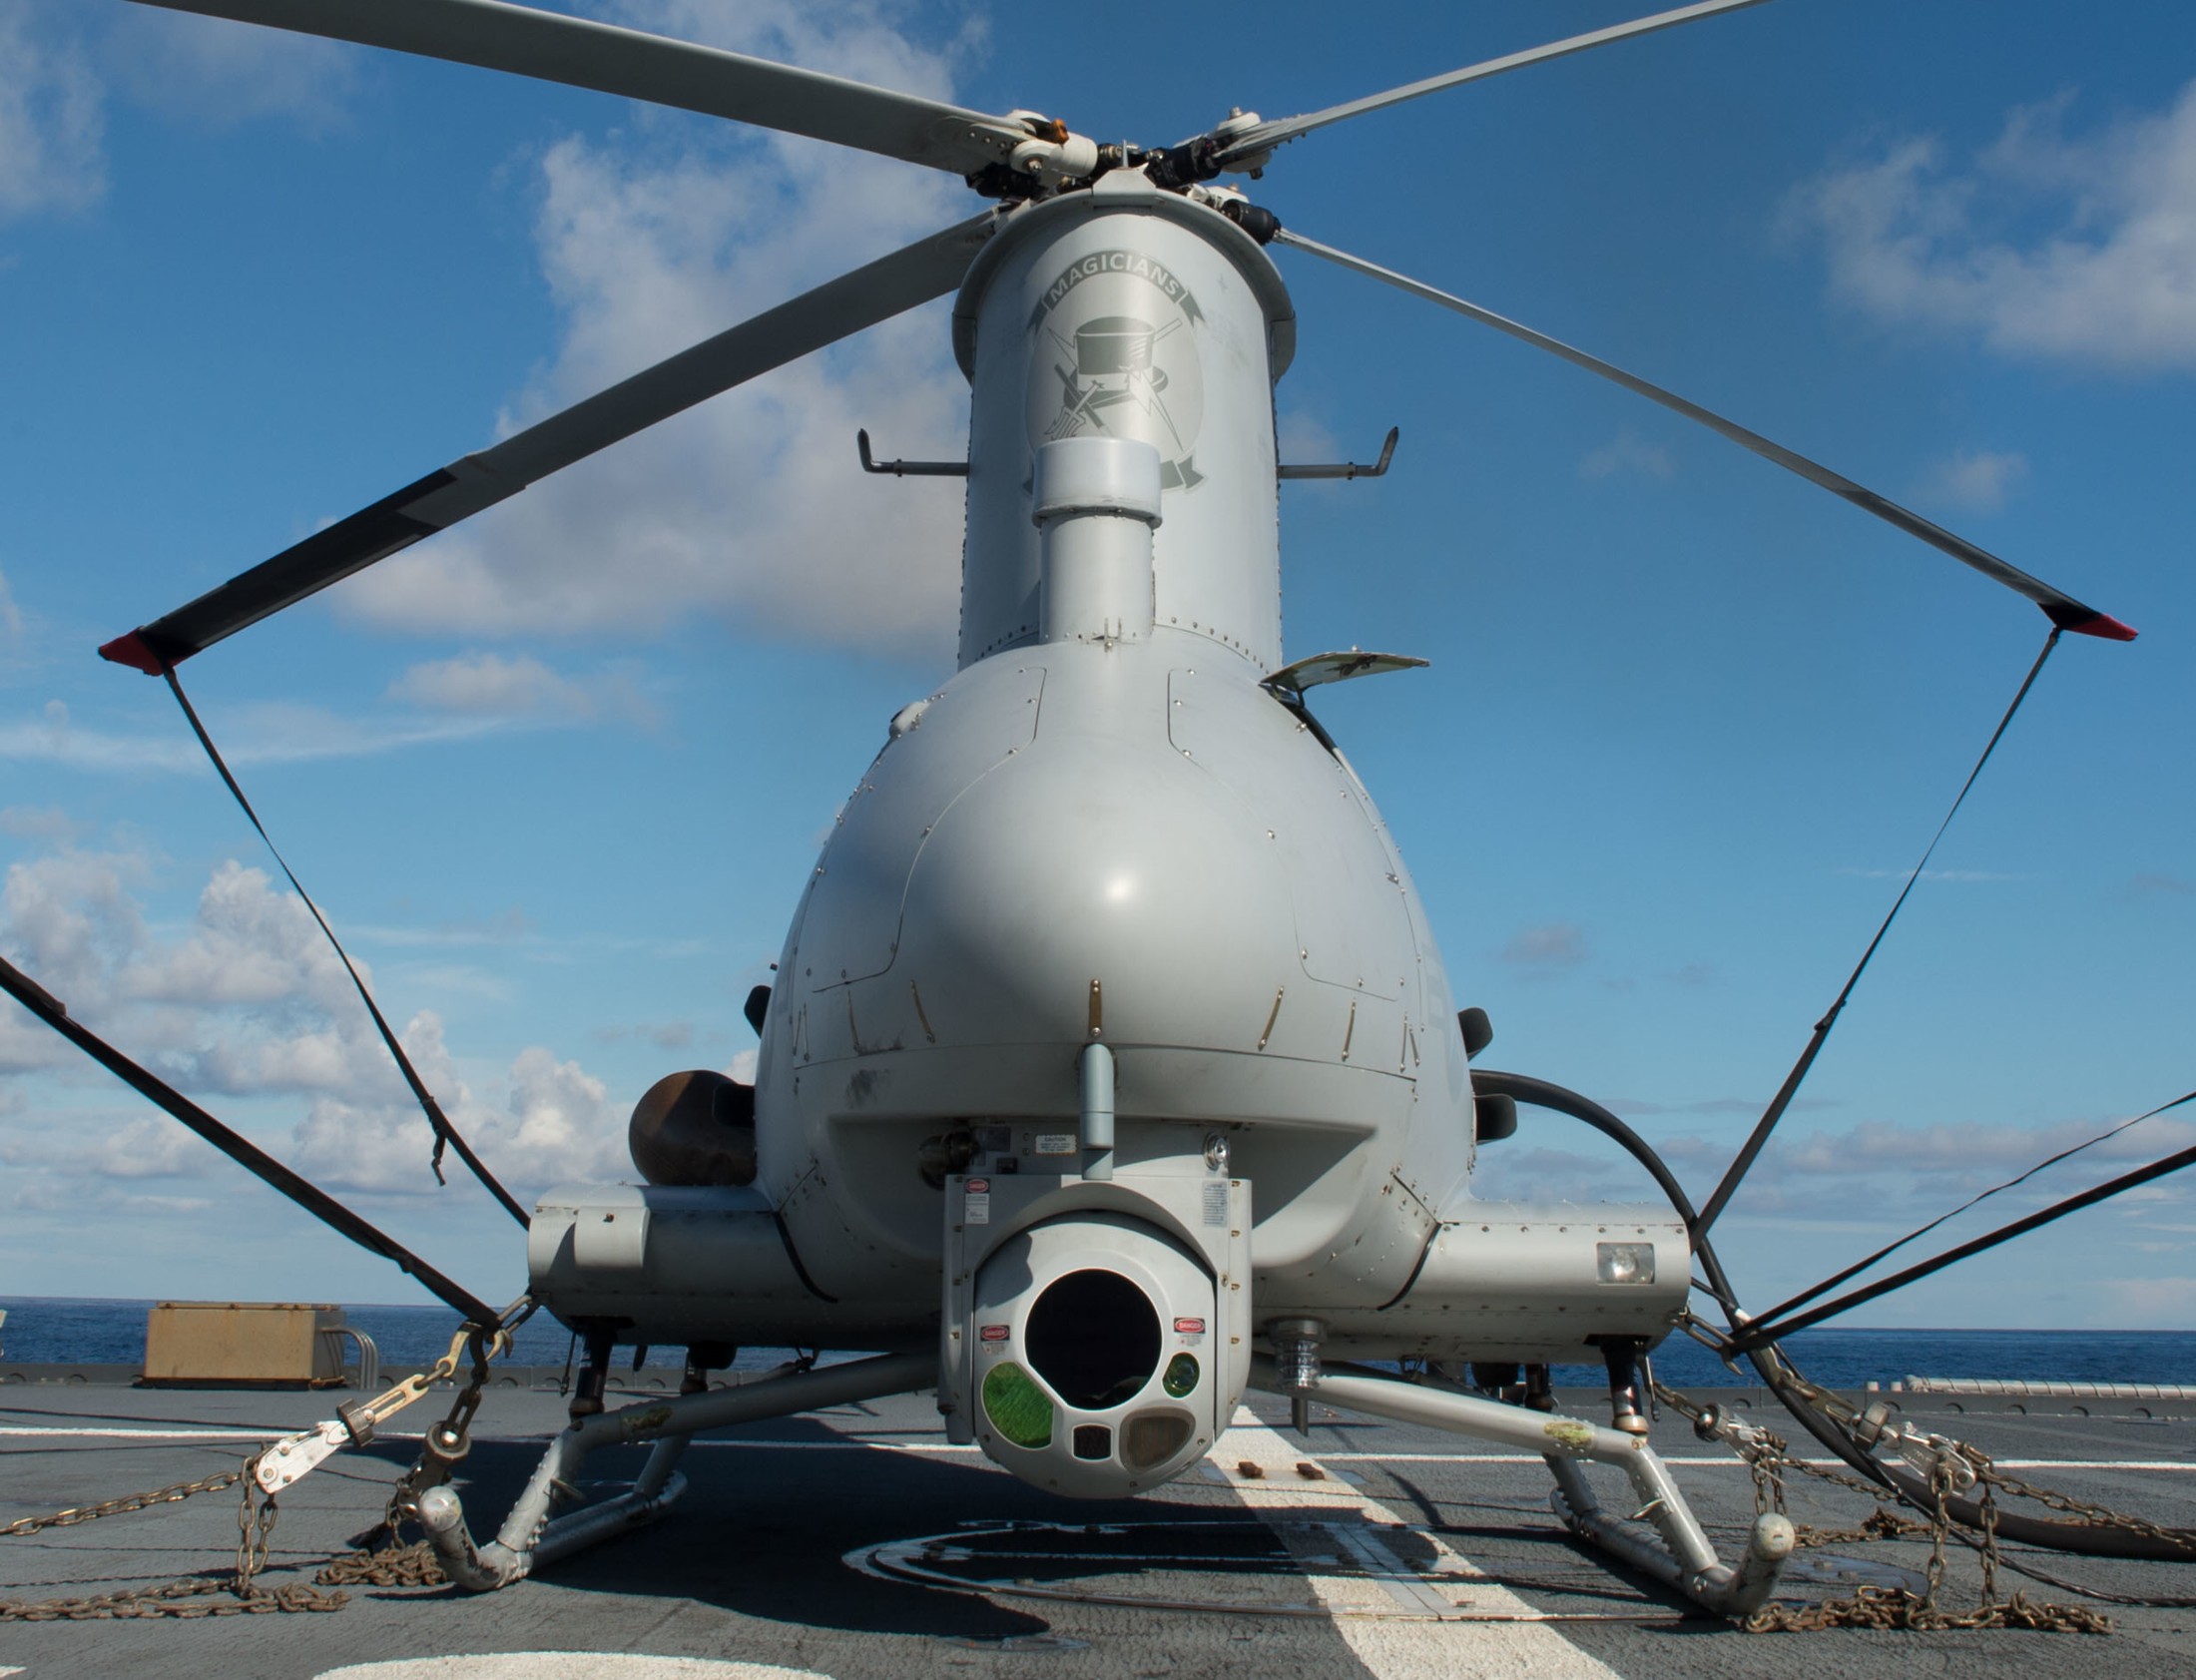 hsm-35 magicians helicopter maritime strike squadron us navy mq-8b fire scout uav 32